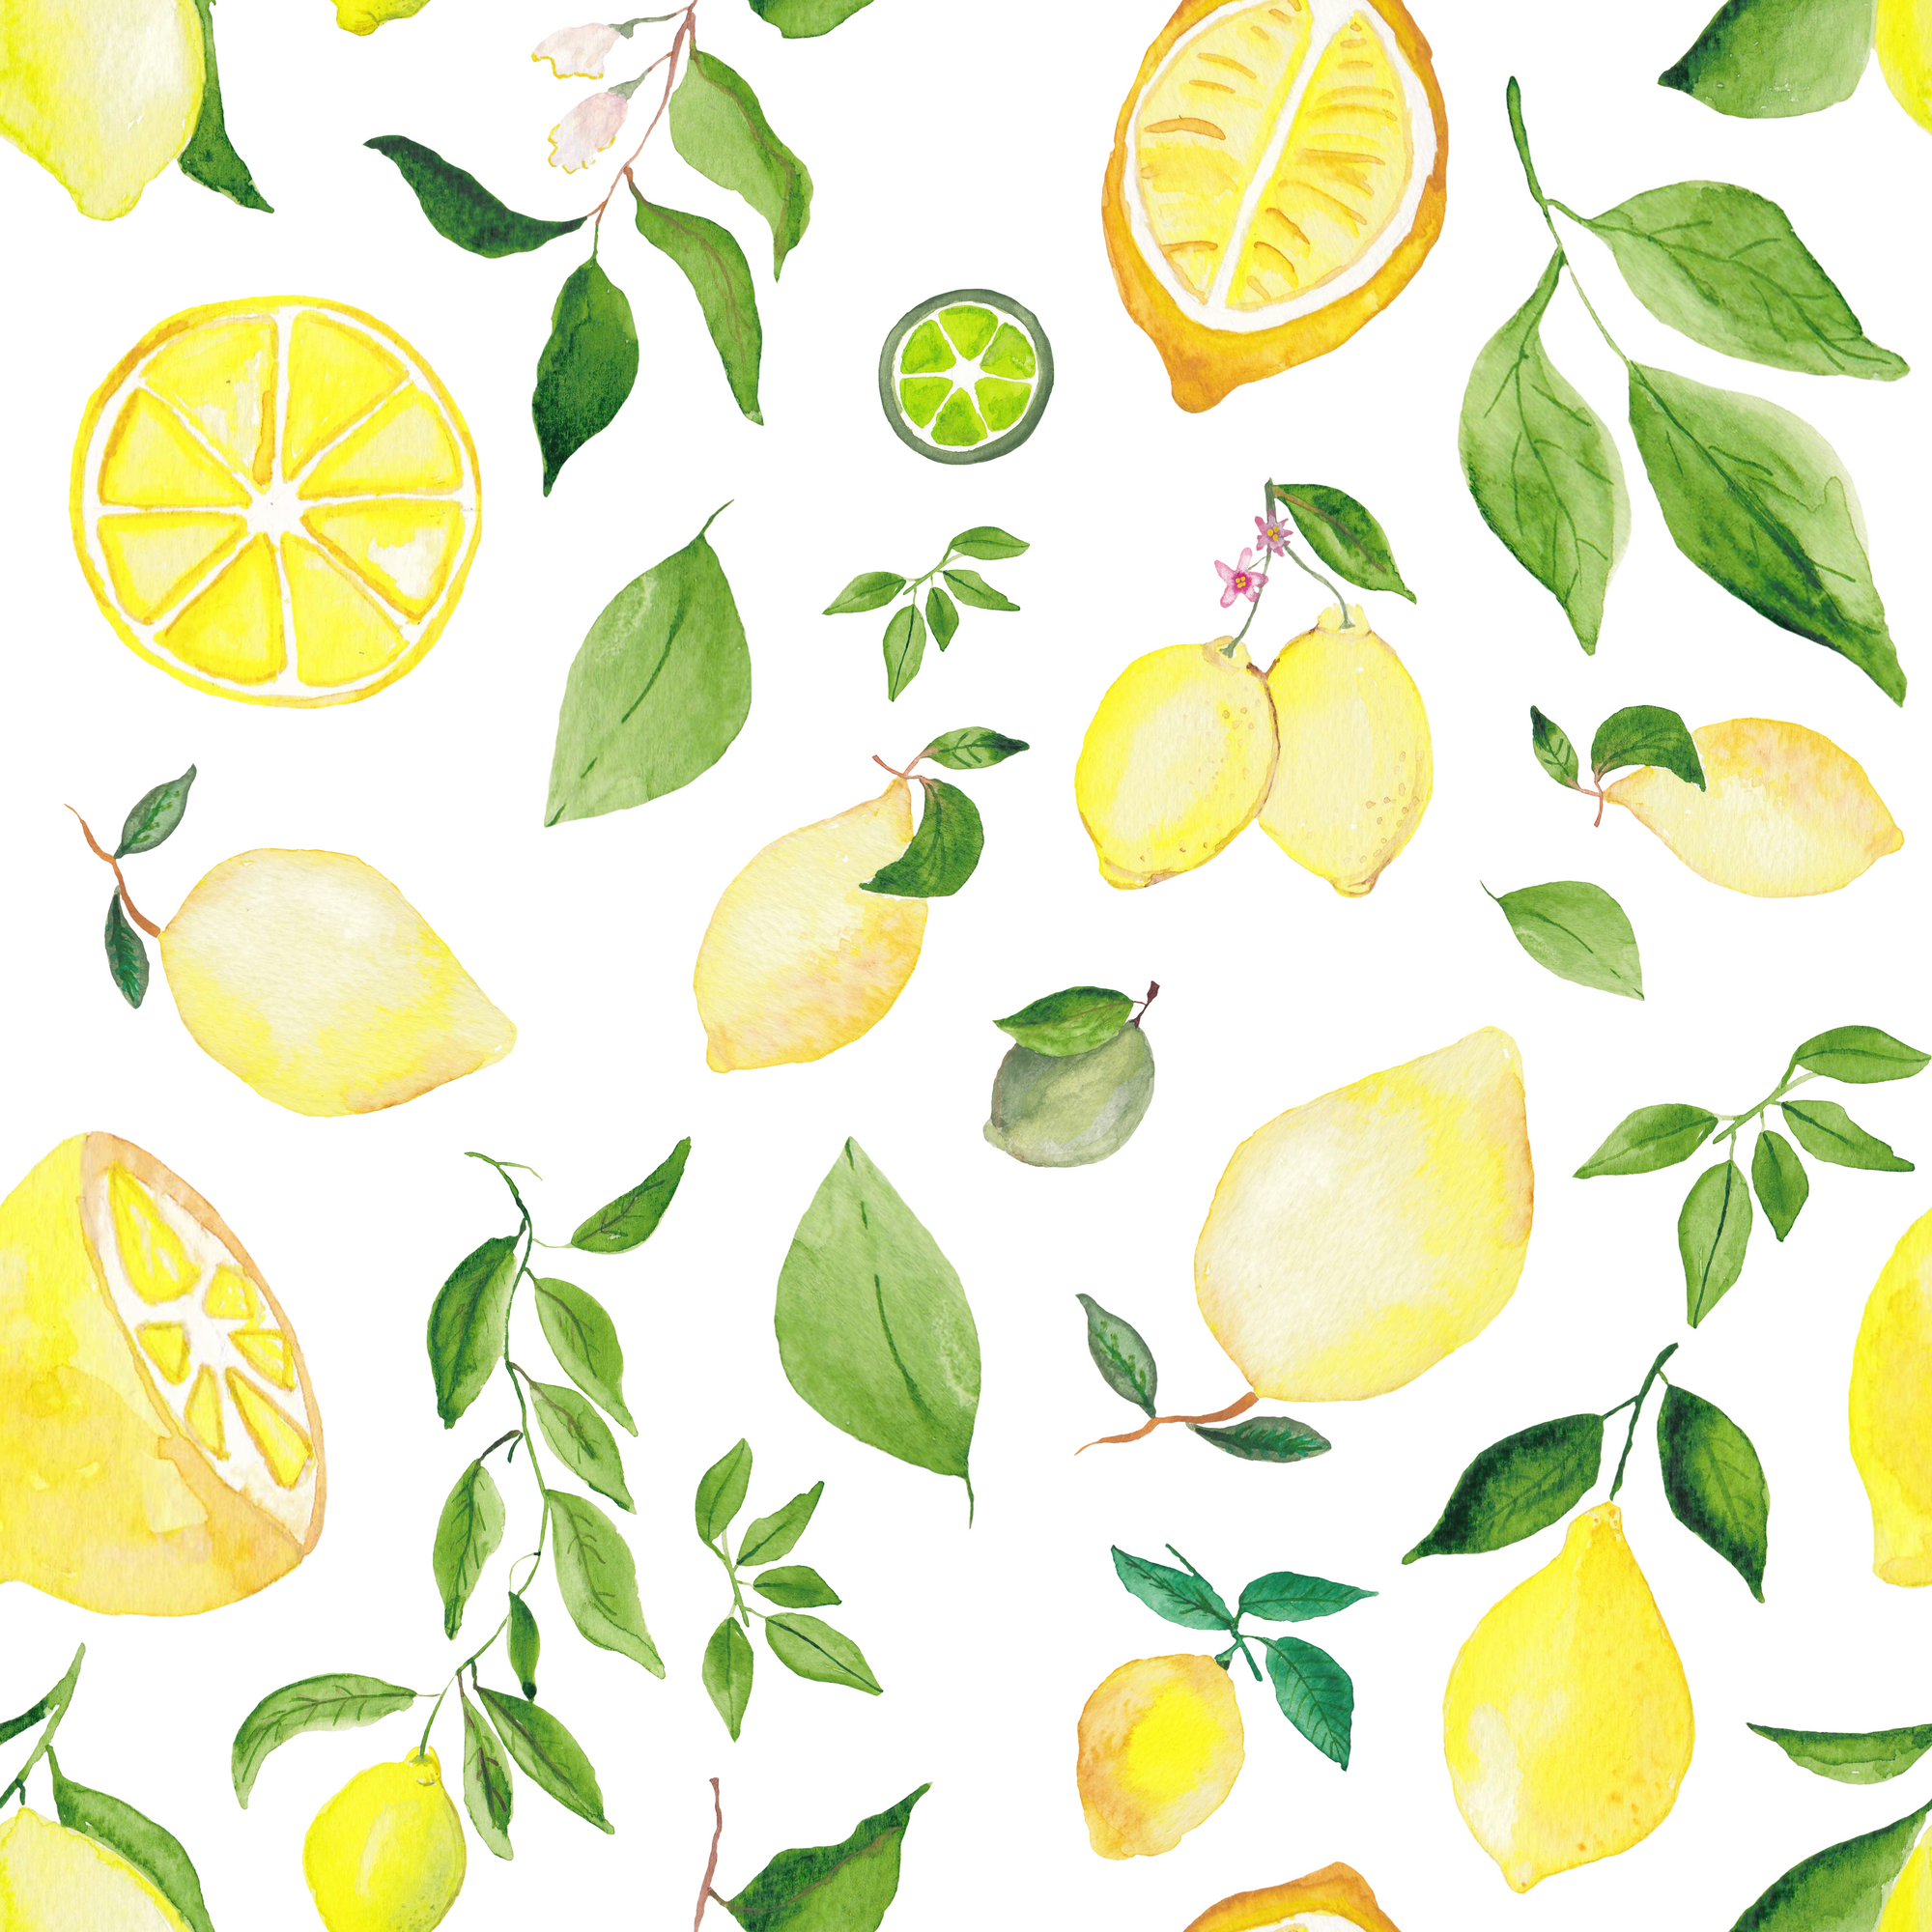 Pattern of Lemons and Limes